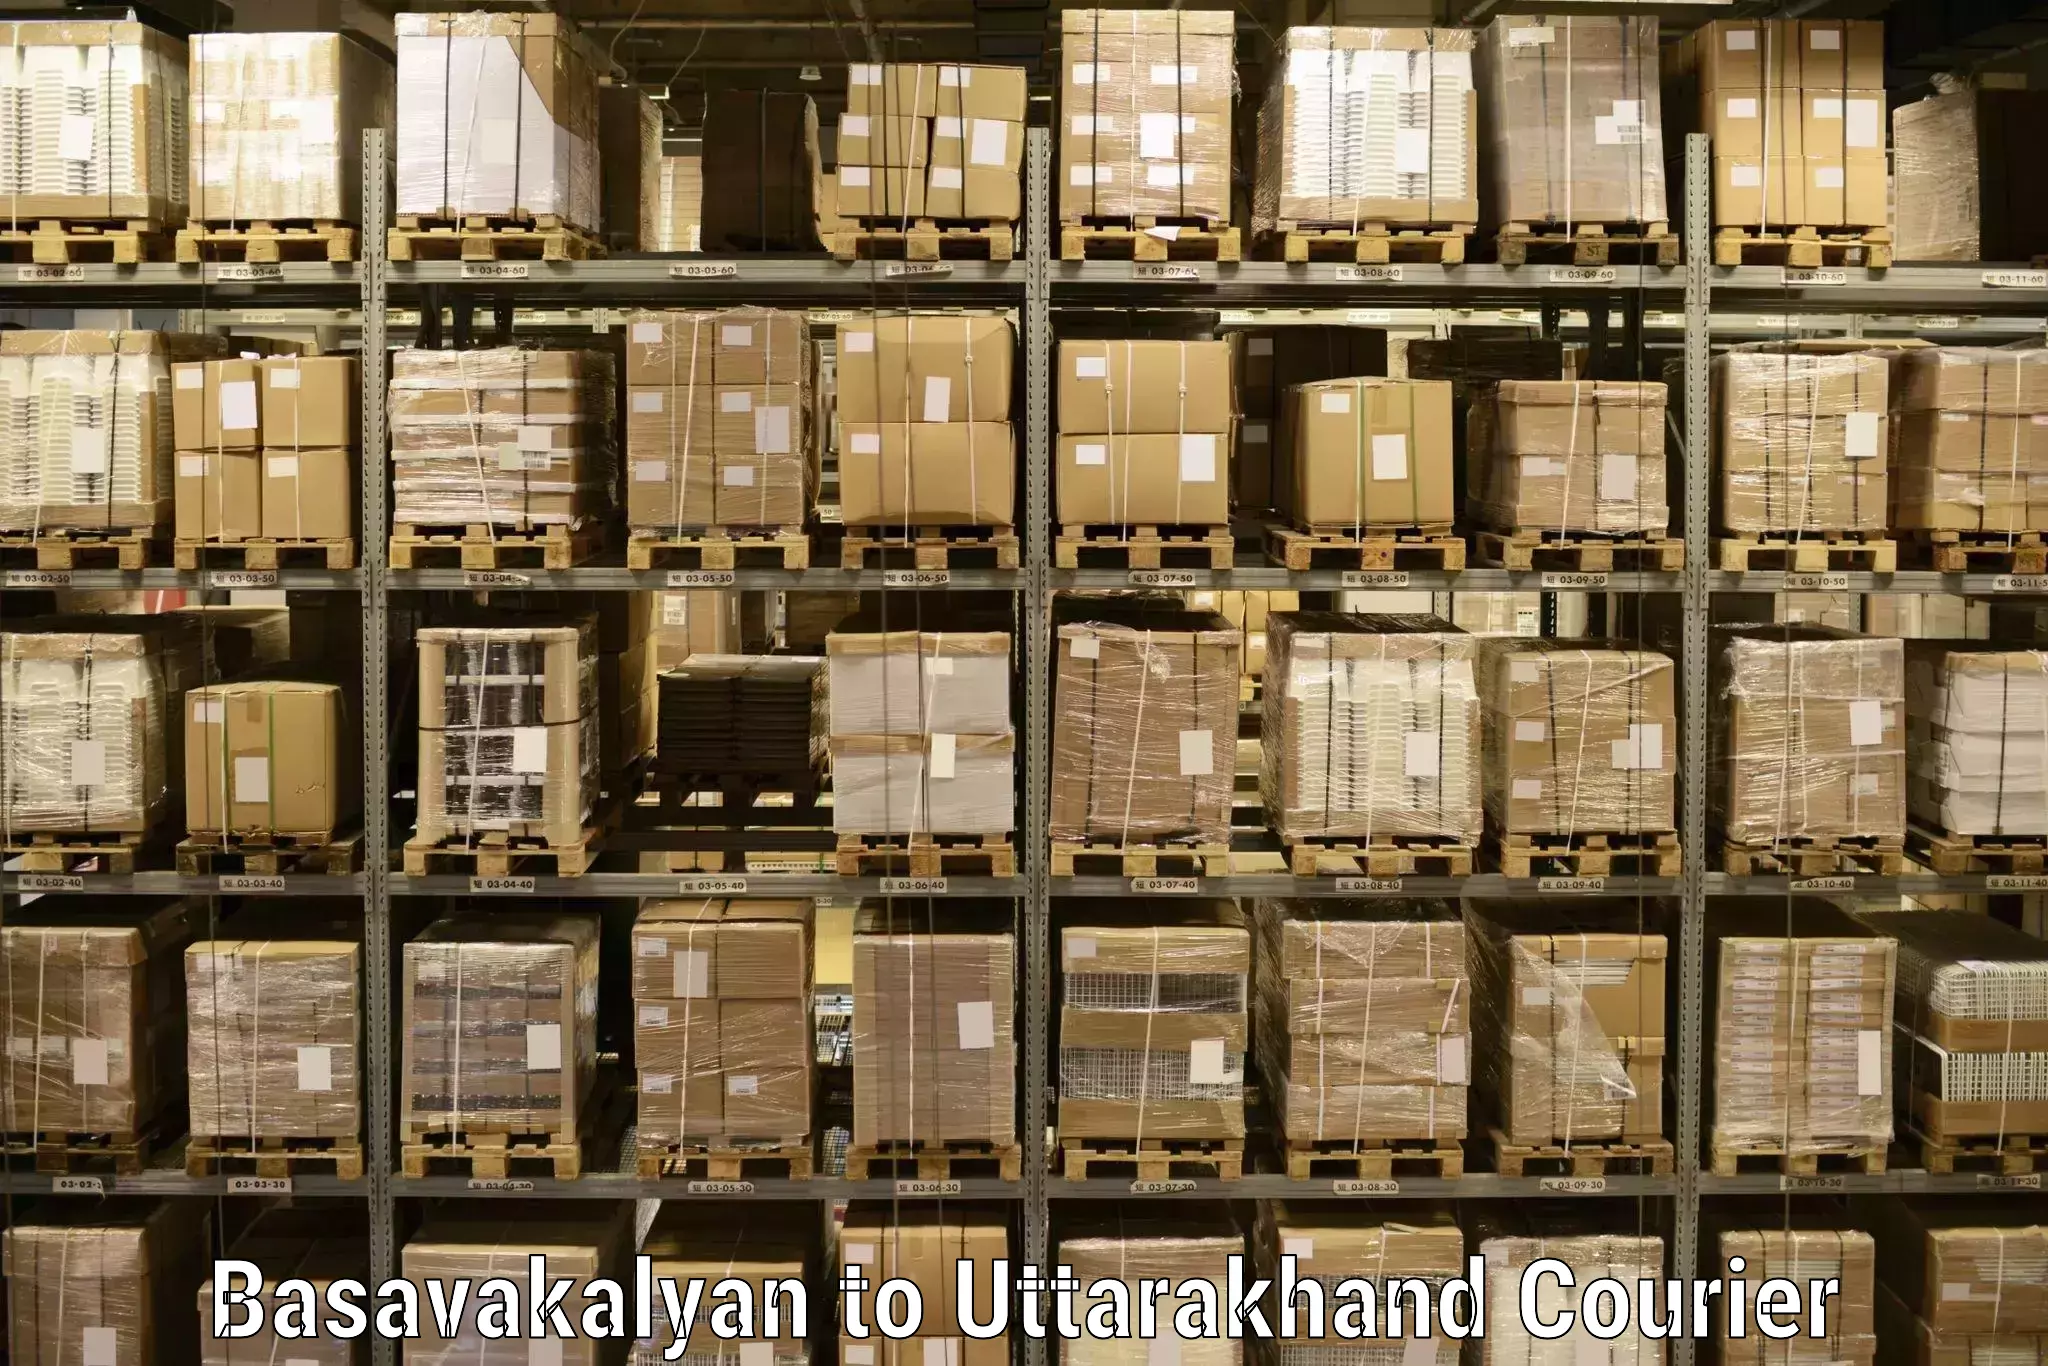 Fastest parcel delivery in Basavakalyan to Bhagwanpur